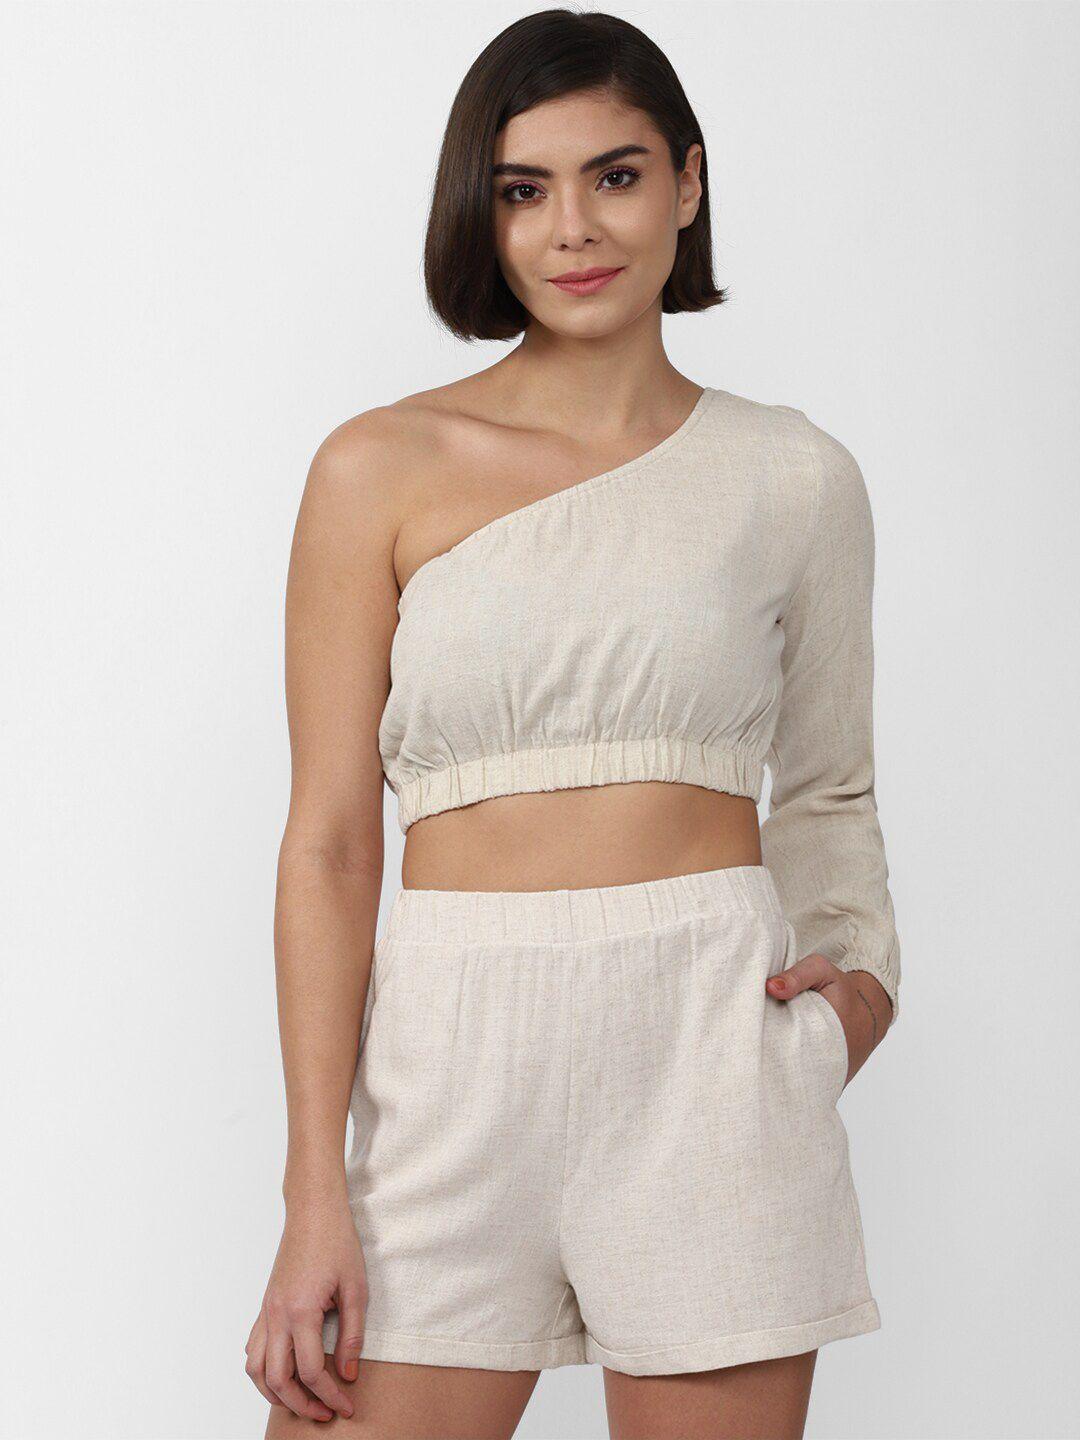 forever-21-women-cream-coloured-top-with-shorts-co-ords-set